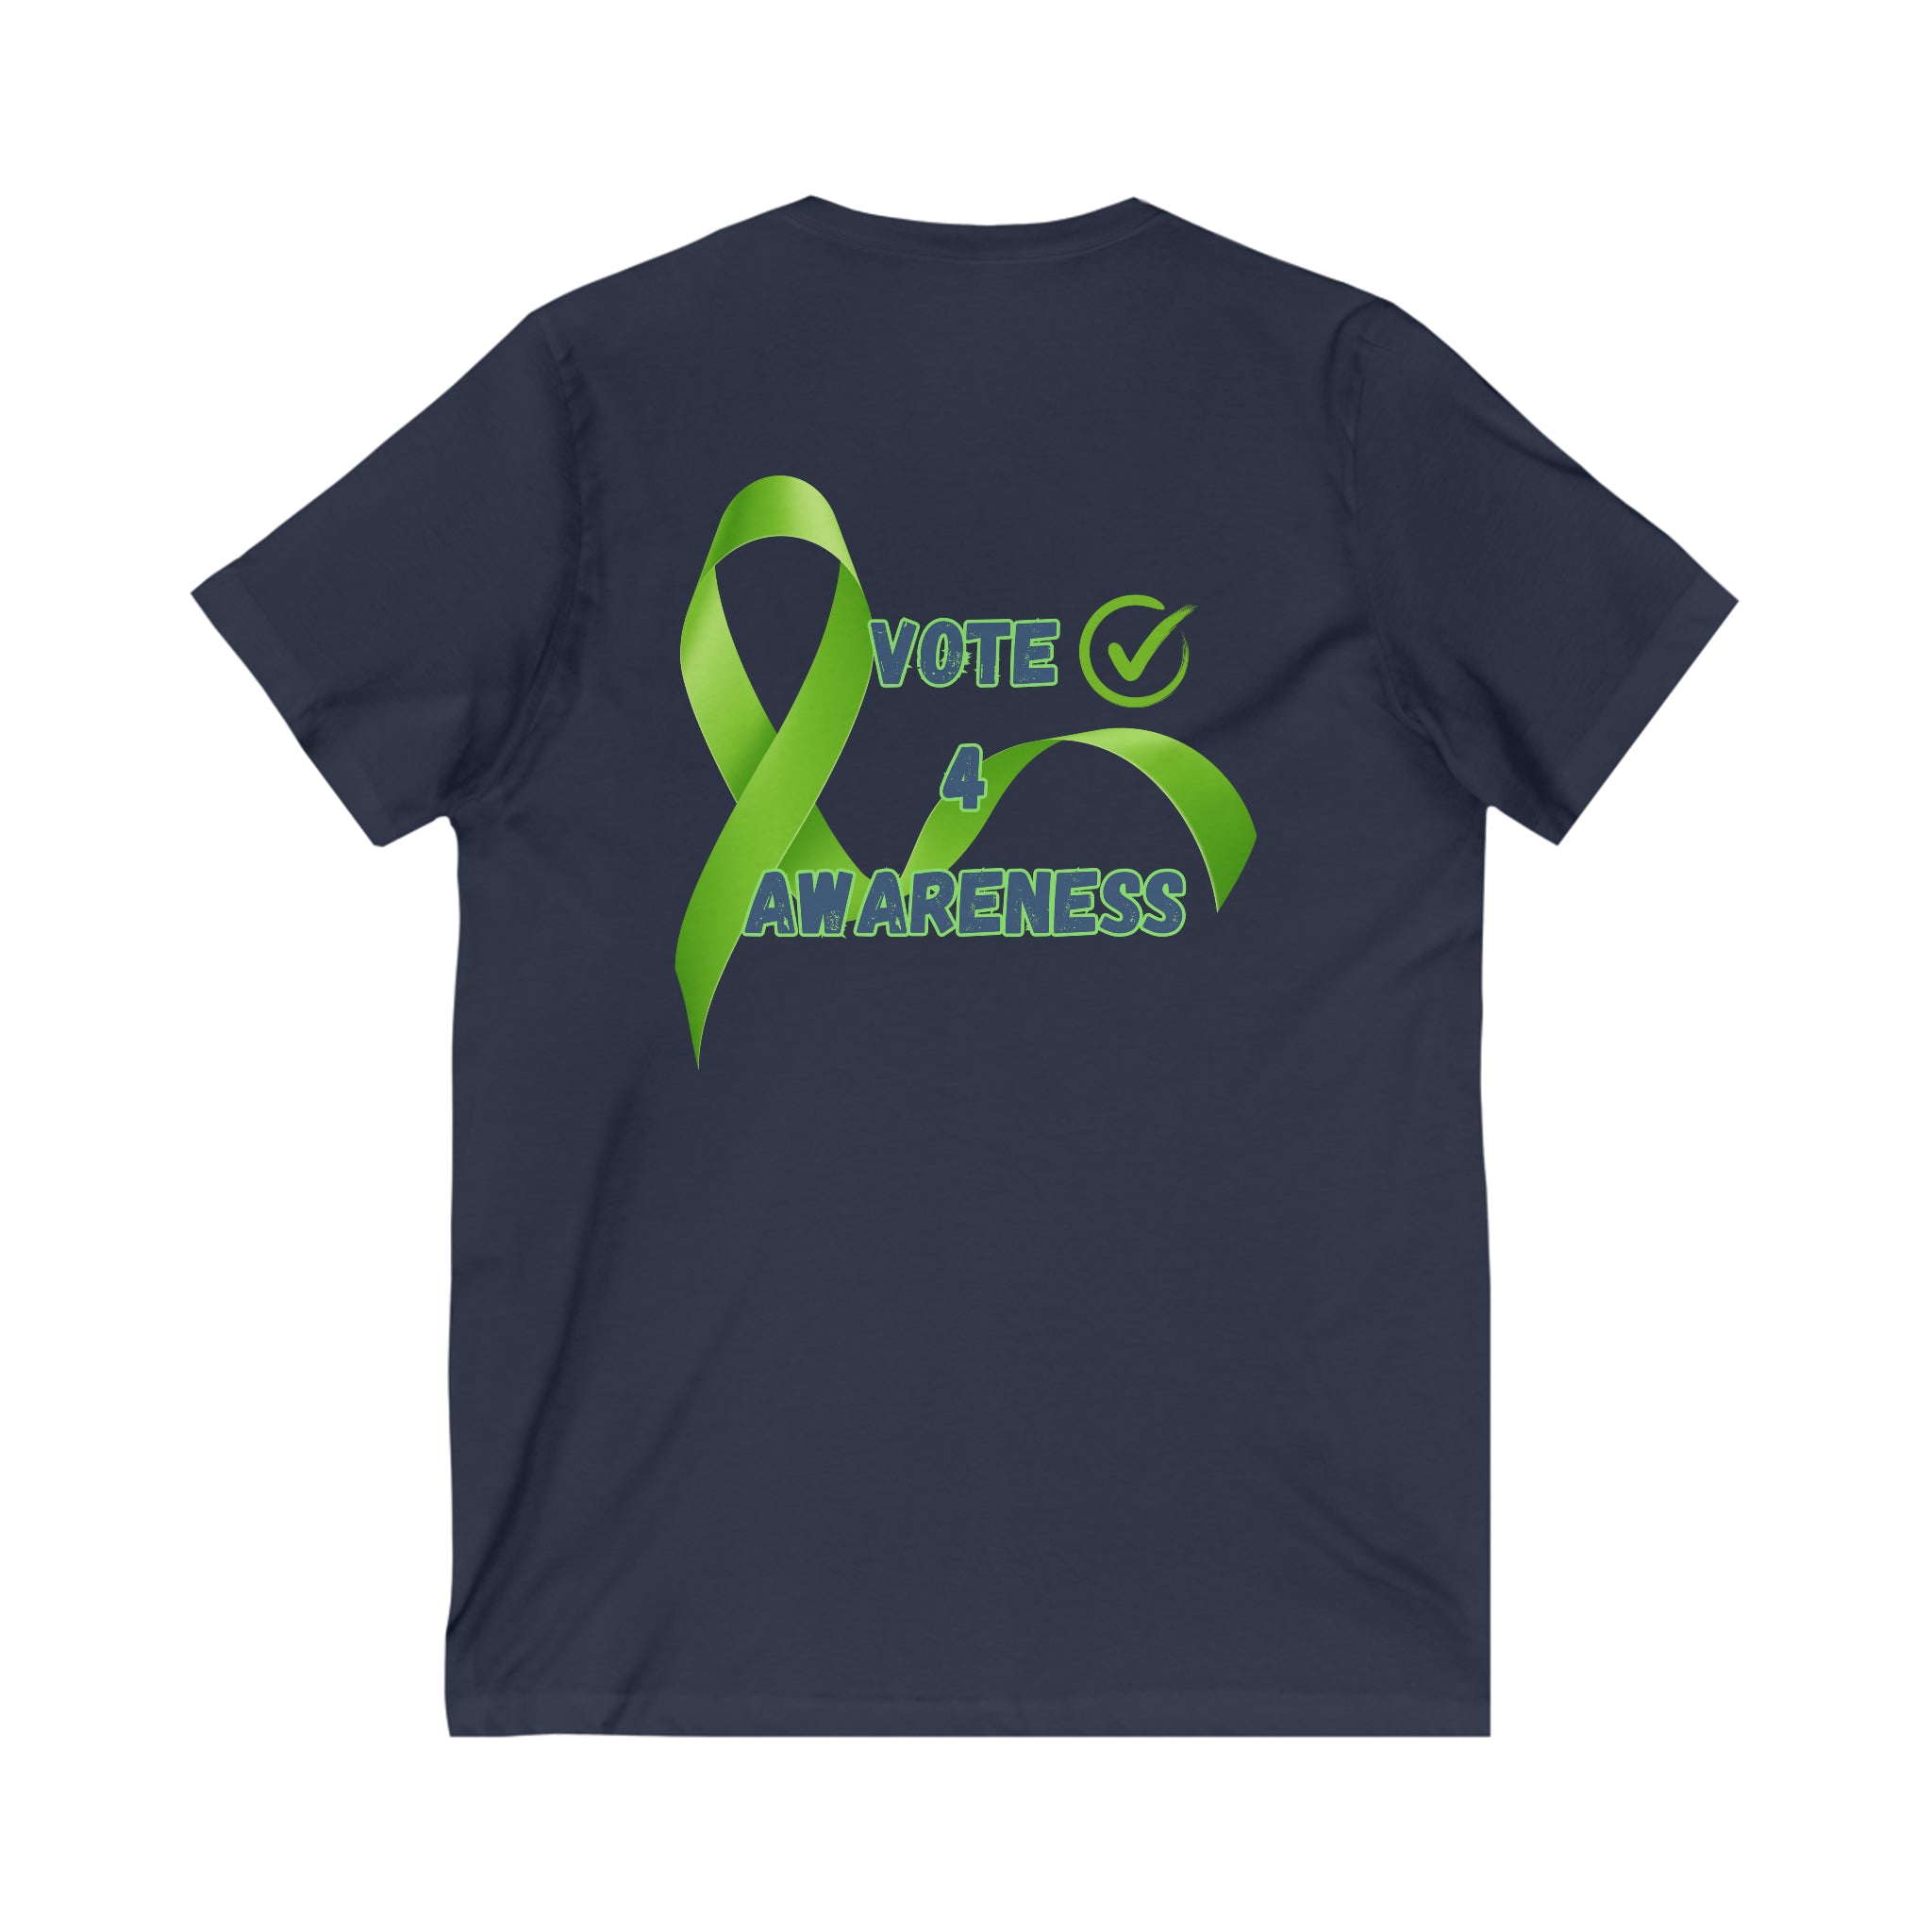 Vote 4 Awareness V-Neck T-Shirt Navy Basic T-Shirt Casual Shirt Classic Tee Comfortable Tee Cotton T-Shirt Everyday Wear Graphic Tee Statement Shirt T-shirt Tee Collection Tee for all Tee for Men Tee for Women Unisex Apparel Vintage Tee V-neck 1520594715978780585_2048 Printify